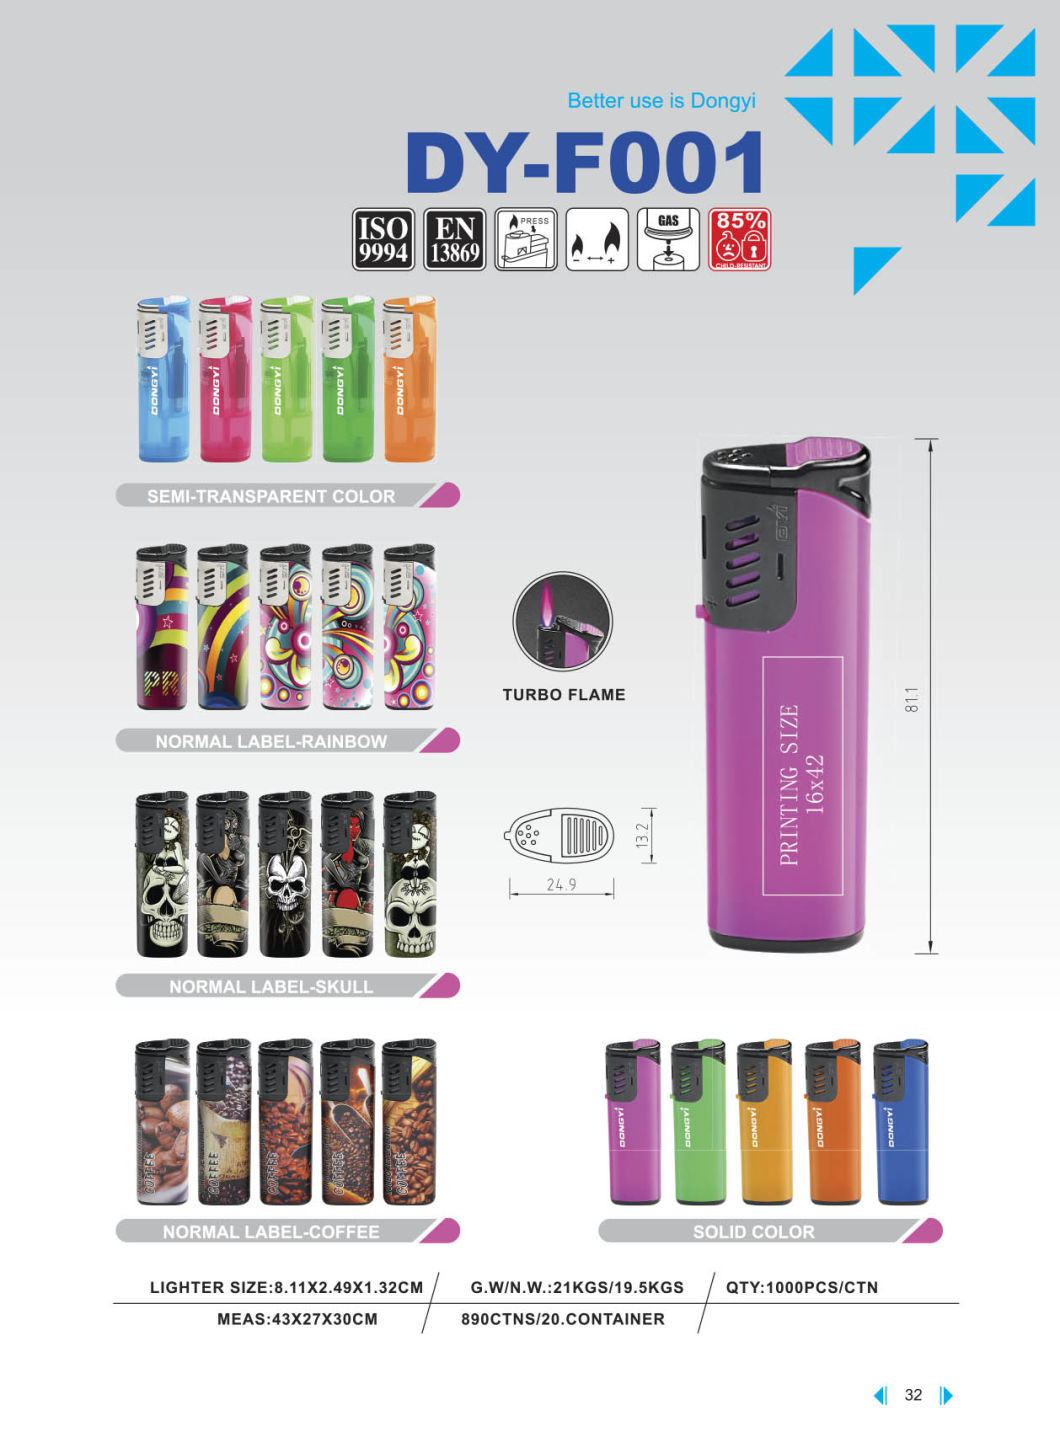 Dongyi High Quality Windproof Gas Lighter with ISO99994 Dy-F001